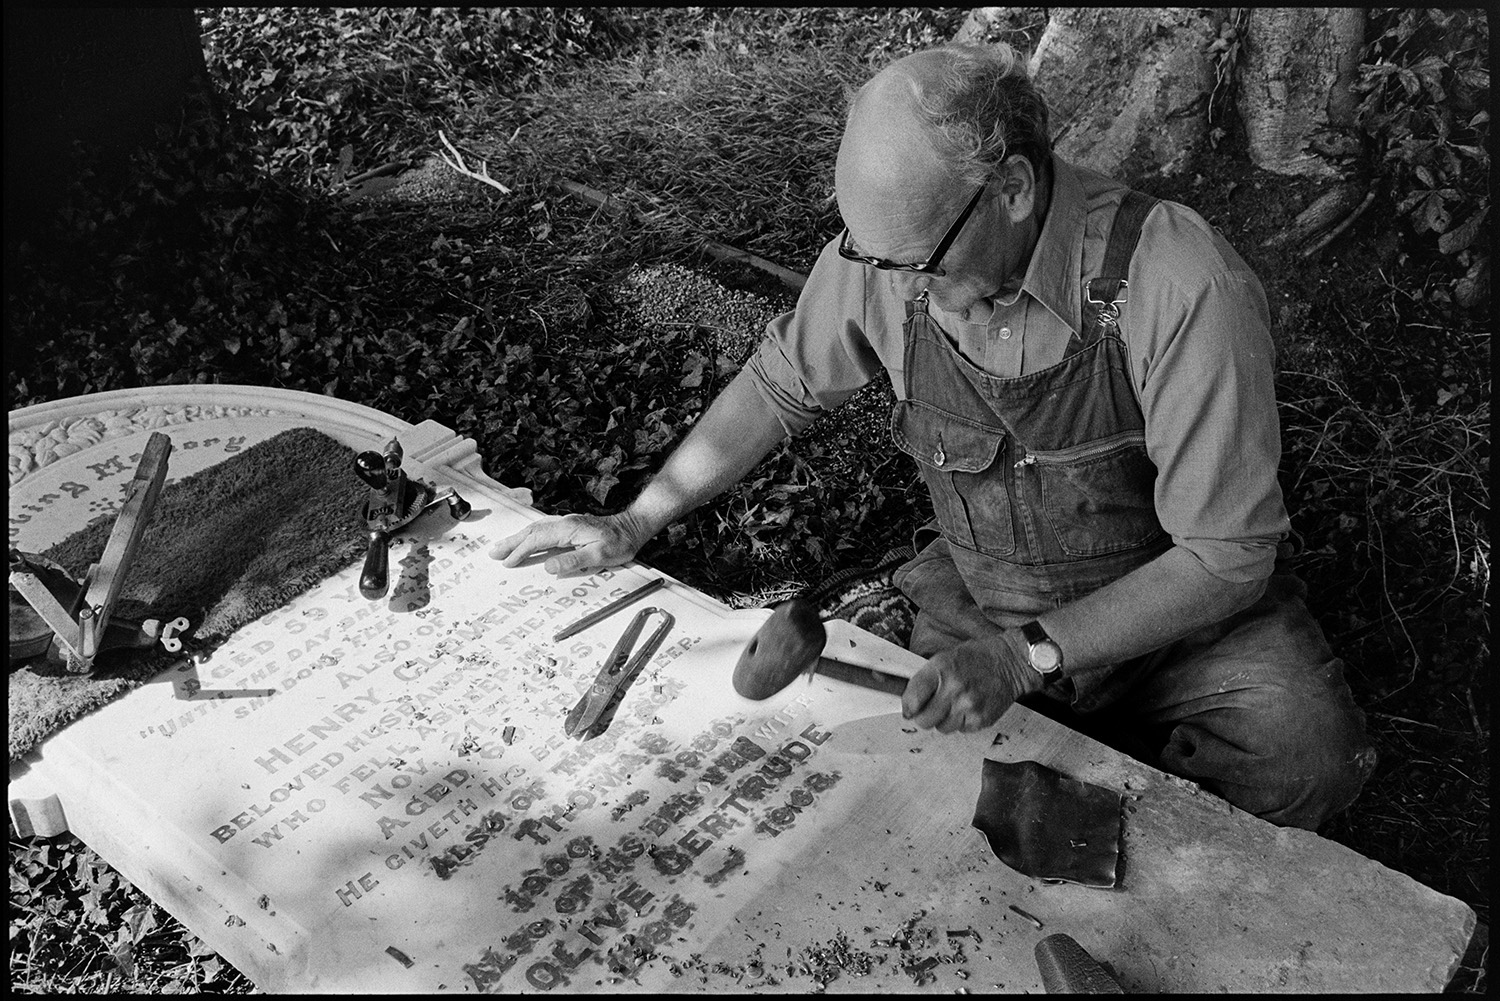 Man working on gravestone, this had been worked by his father and his boss before him. 
[Bruce Edyvean engraving a gravestone in Beaford Churchyard. He is using various tools including a hand drill and a mallet. His father and his father's boss had both worked on the same stone.]